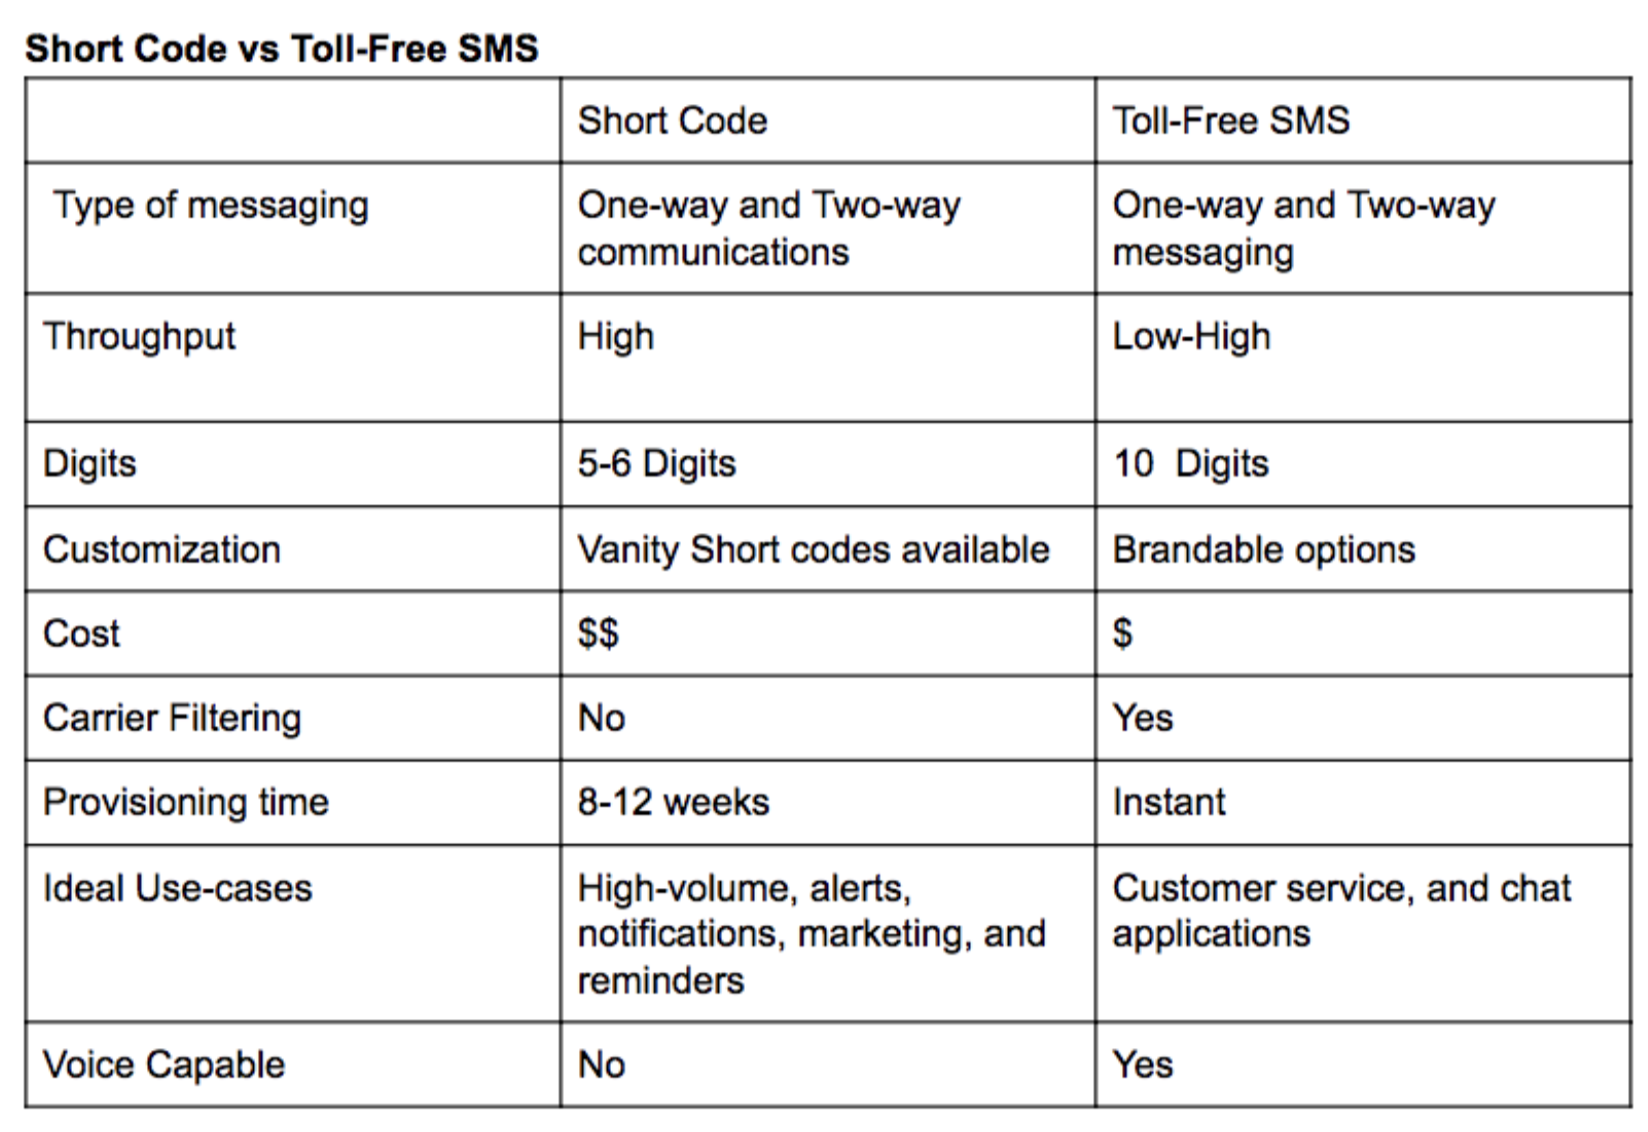 Short code vs. Toll-Free SMS